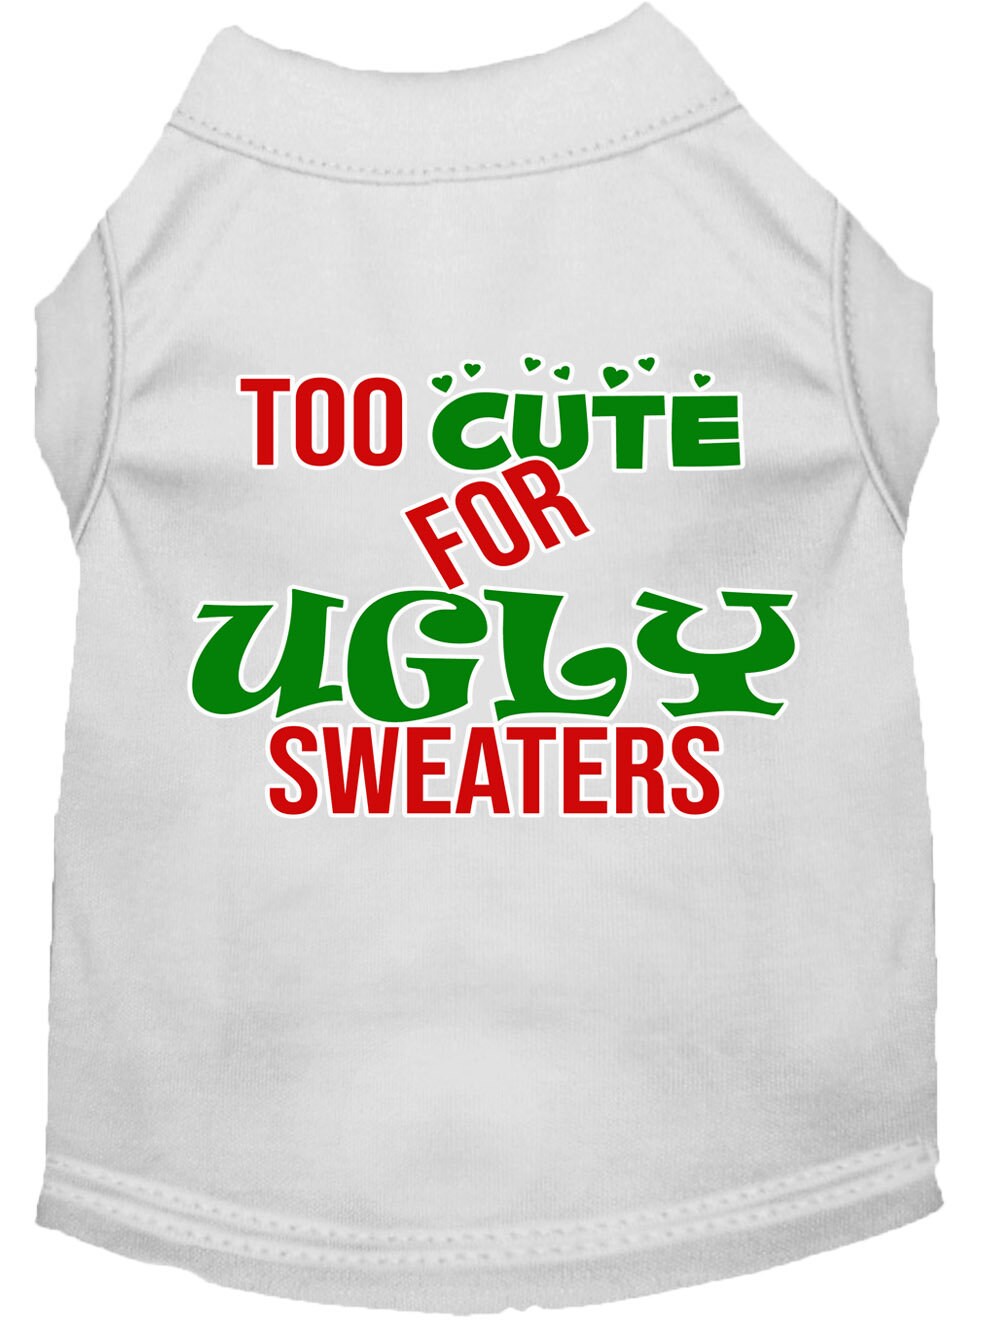 Christmas Pet Dog & Cat Shirt Screen Printed, "Too Cute For Ugly Sweaters"